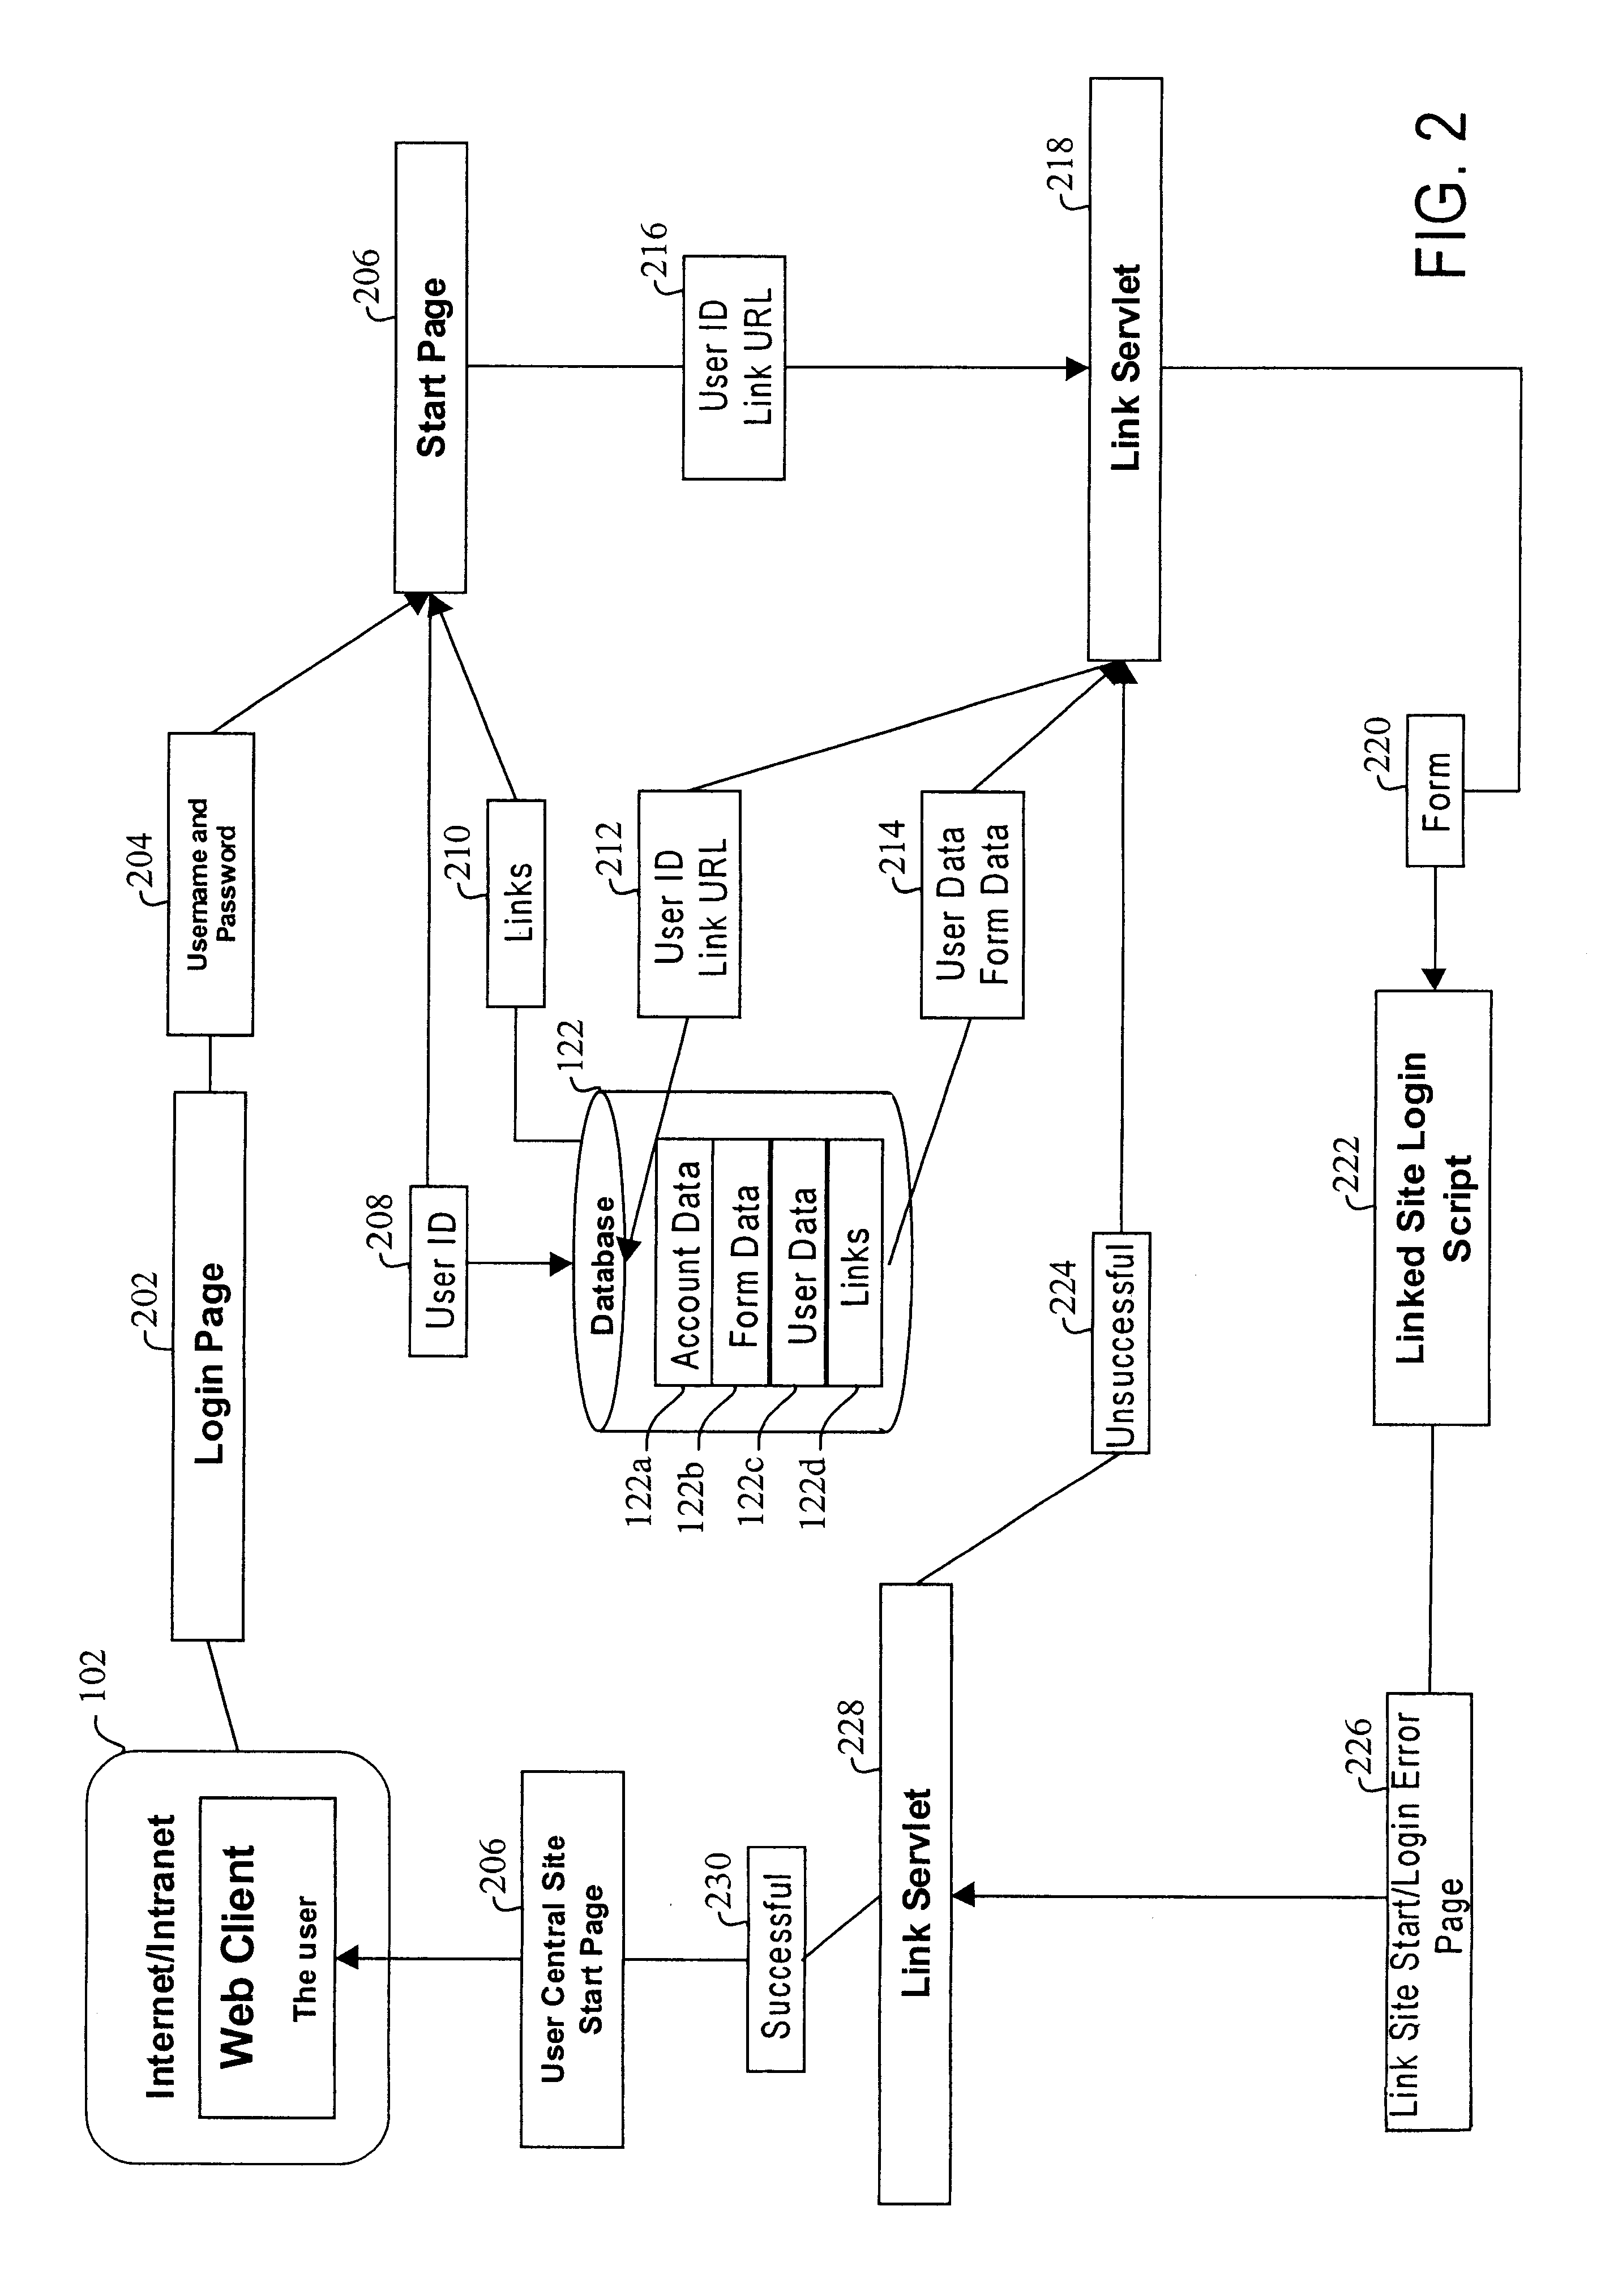 Method, system and computer readable medium for web site account and e-commerce management from a central location